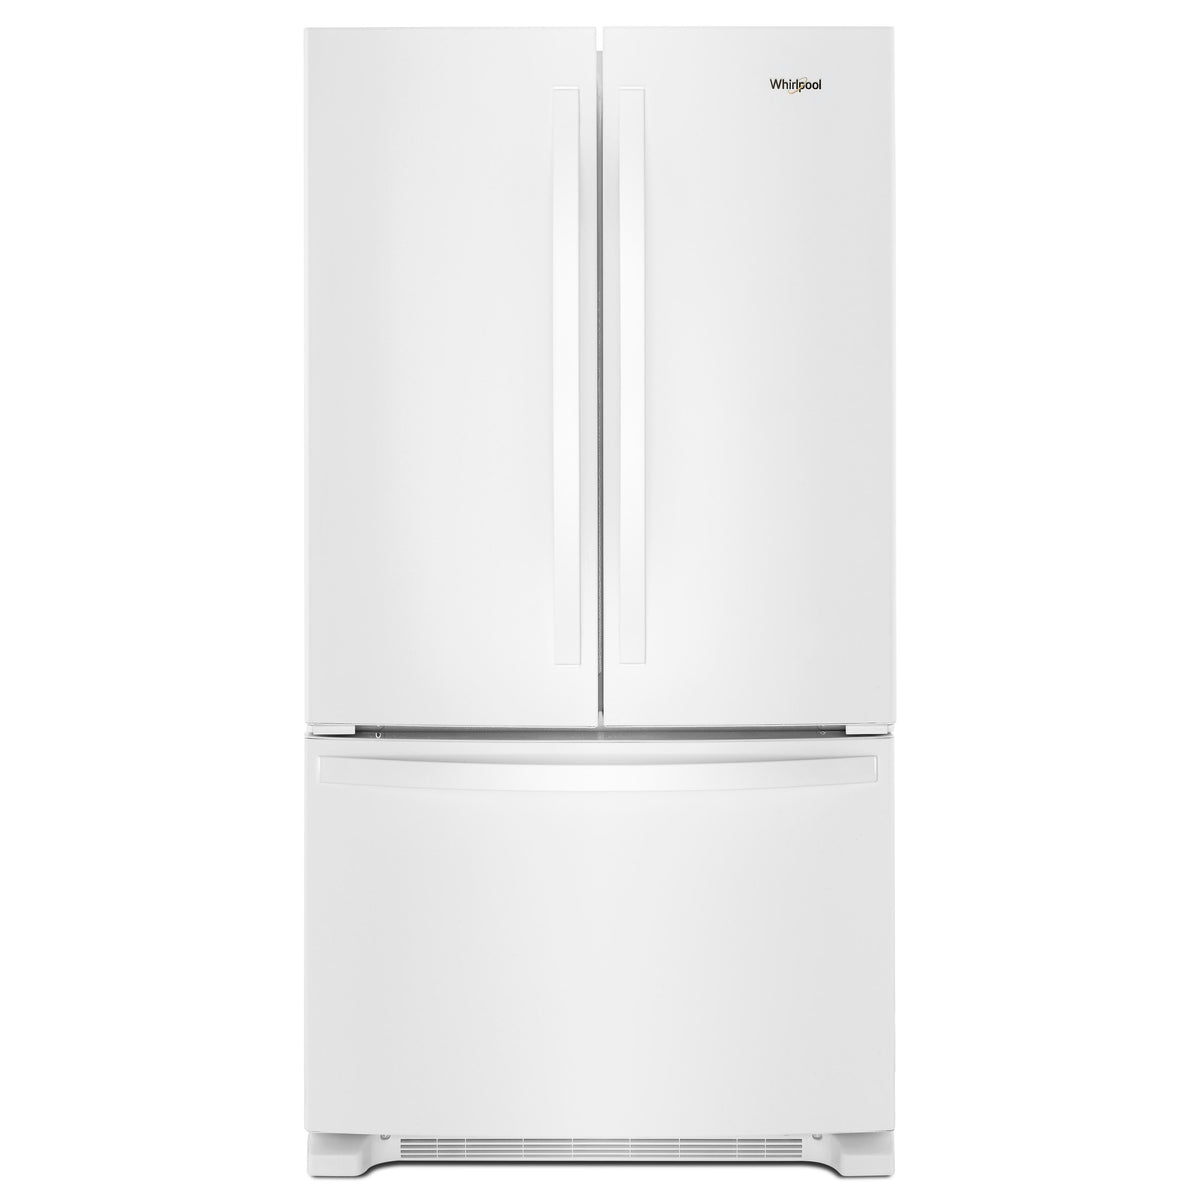 Whirlpool 36-inch, 20.0 cu. ft. Counter-Depth French 3-Door Refrigerator WRF540CWHW IMAGE 1